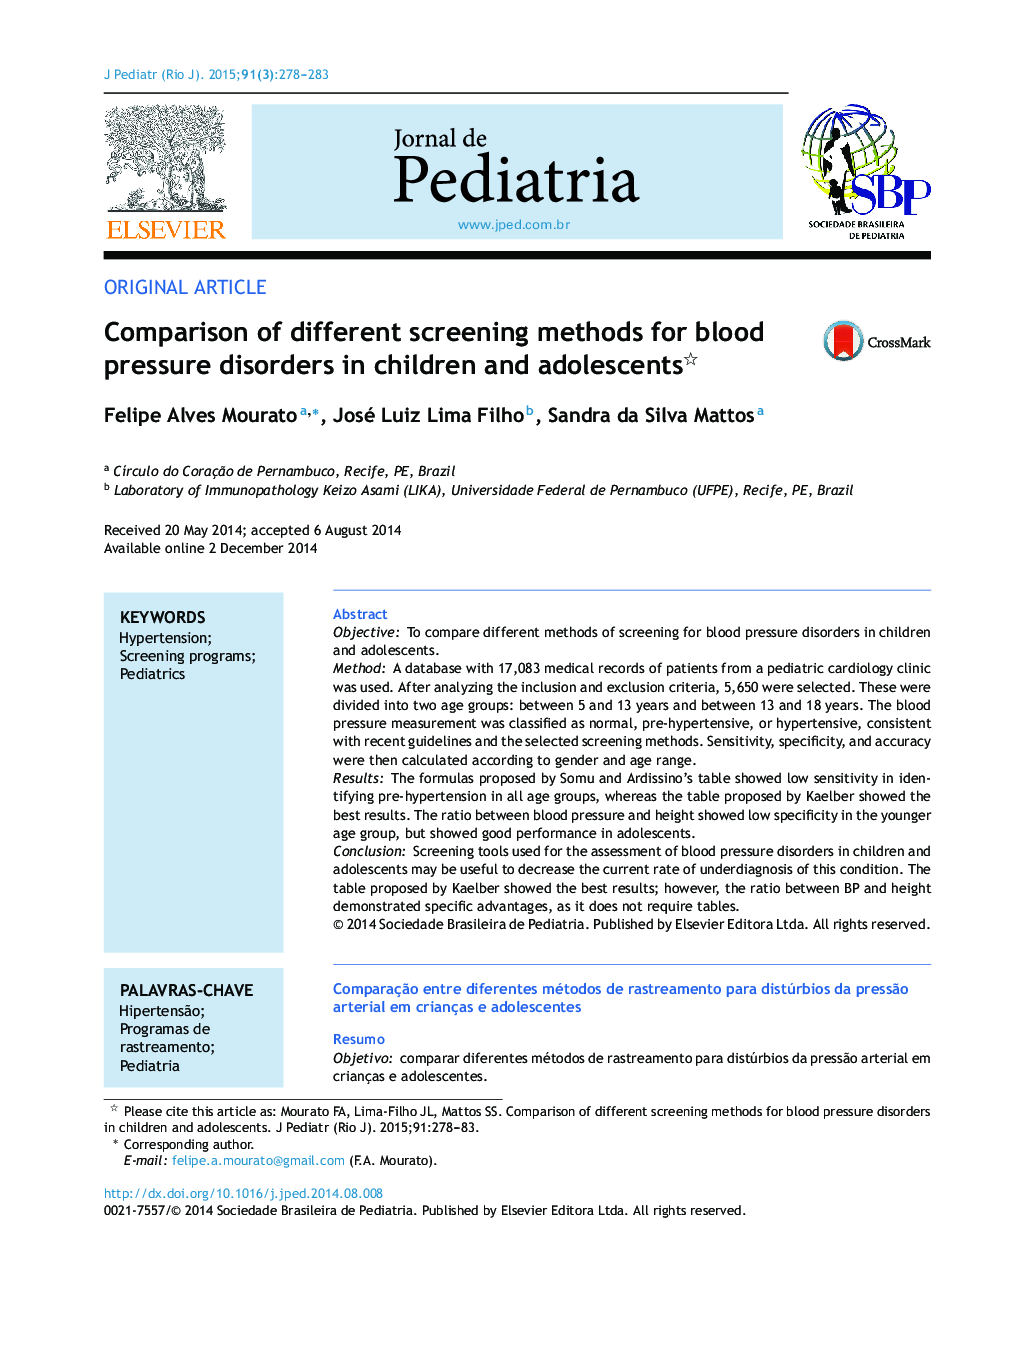 Comparison of different screening methods for blood pressure disorders in children and adolescents 